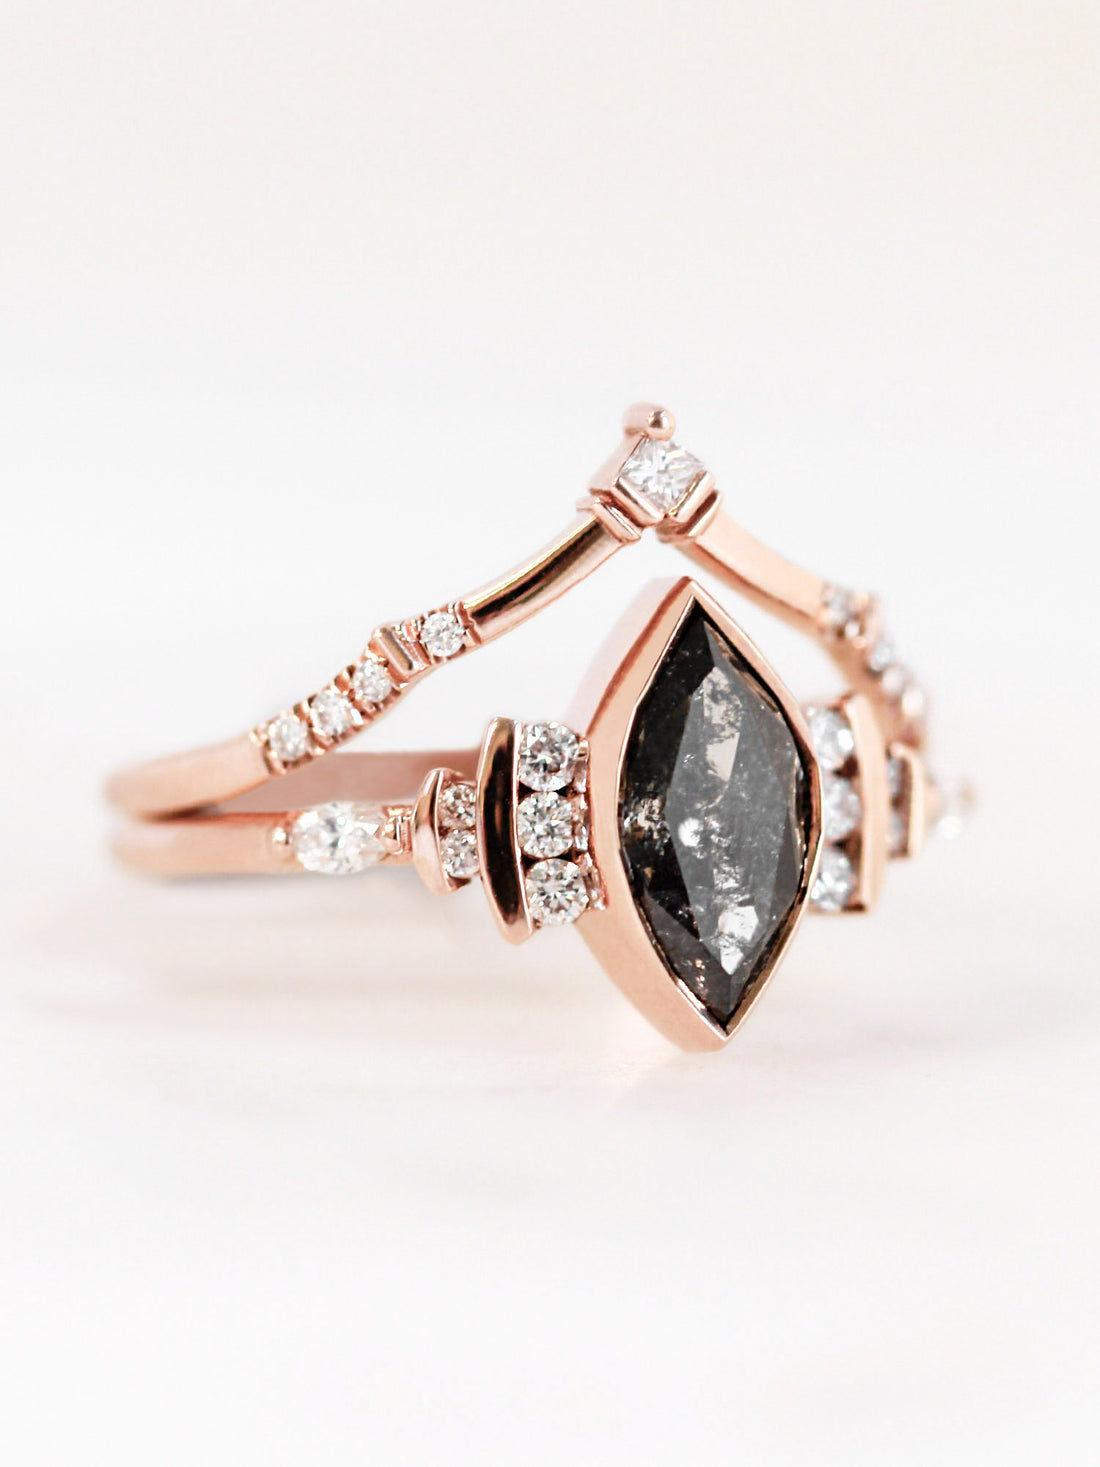 hiddenspace-engagement-rings-marquise-delcy-salt-and-pepper-diamond-14k-right-with-band